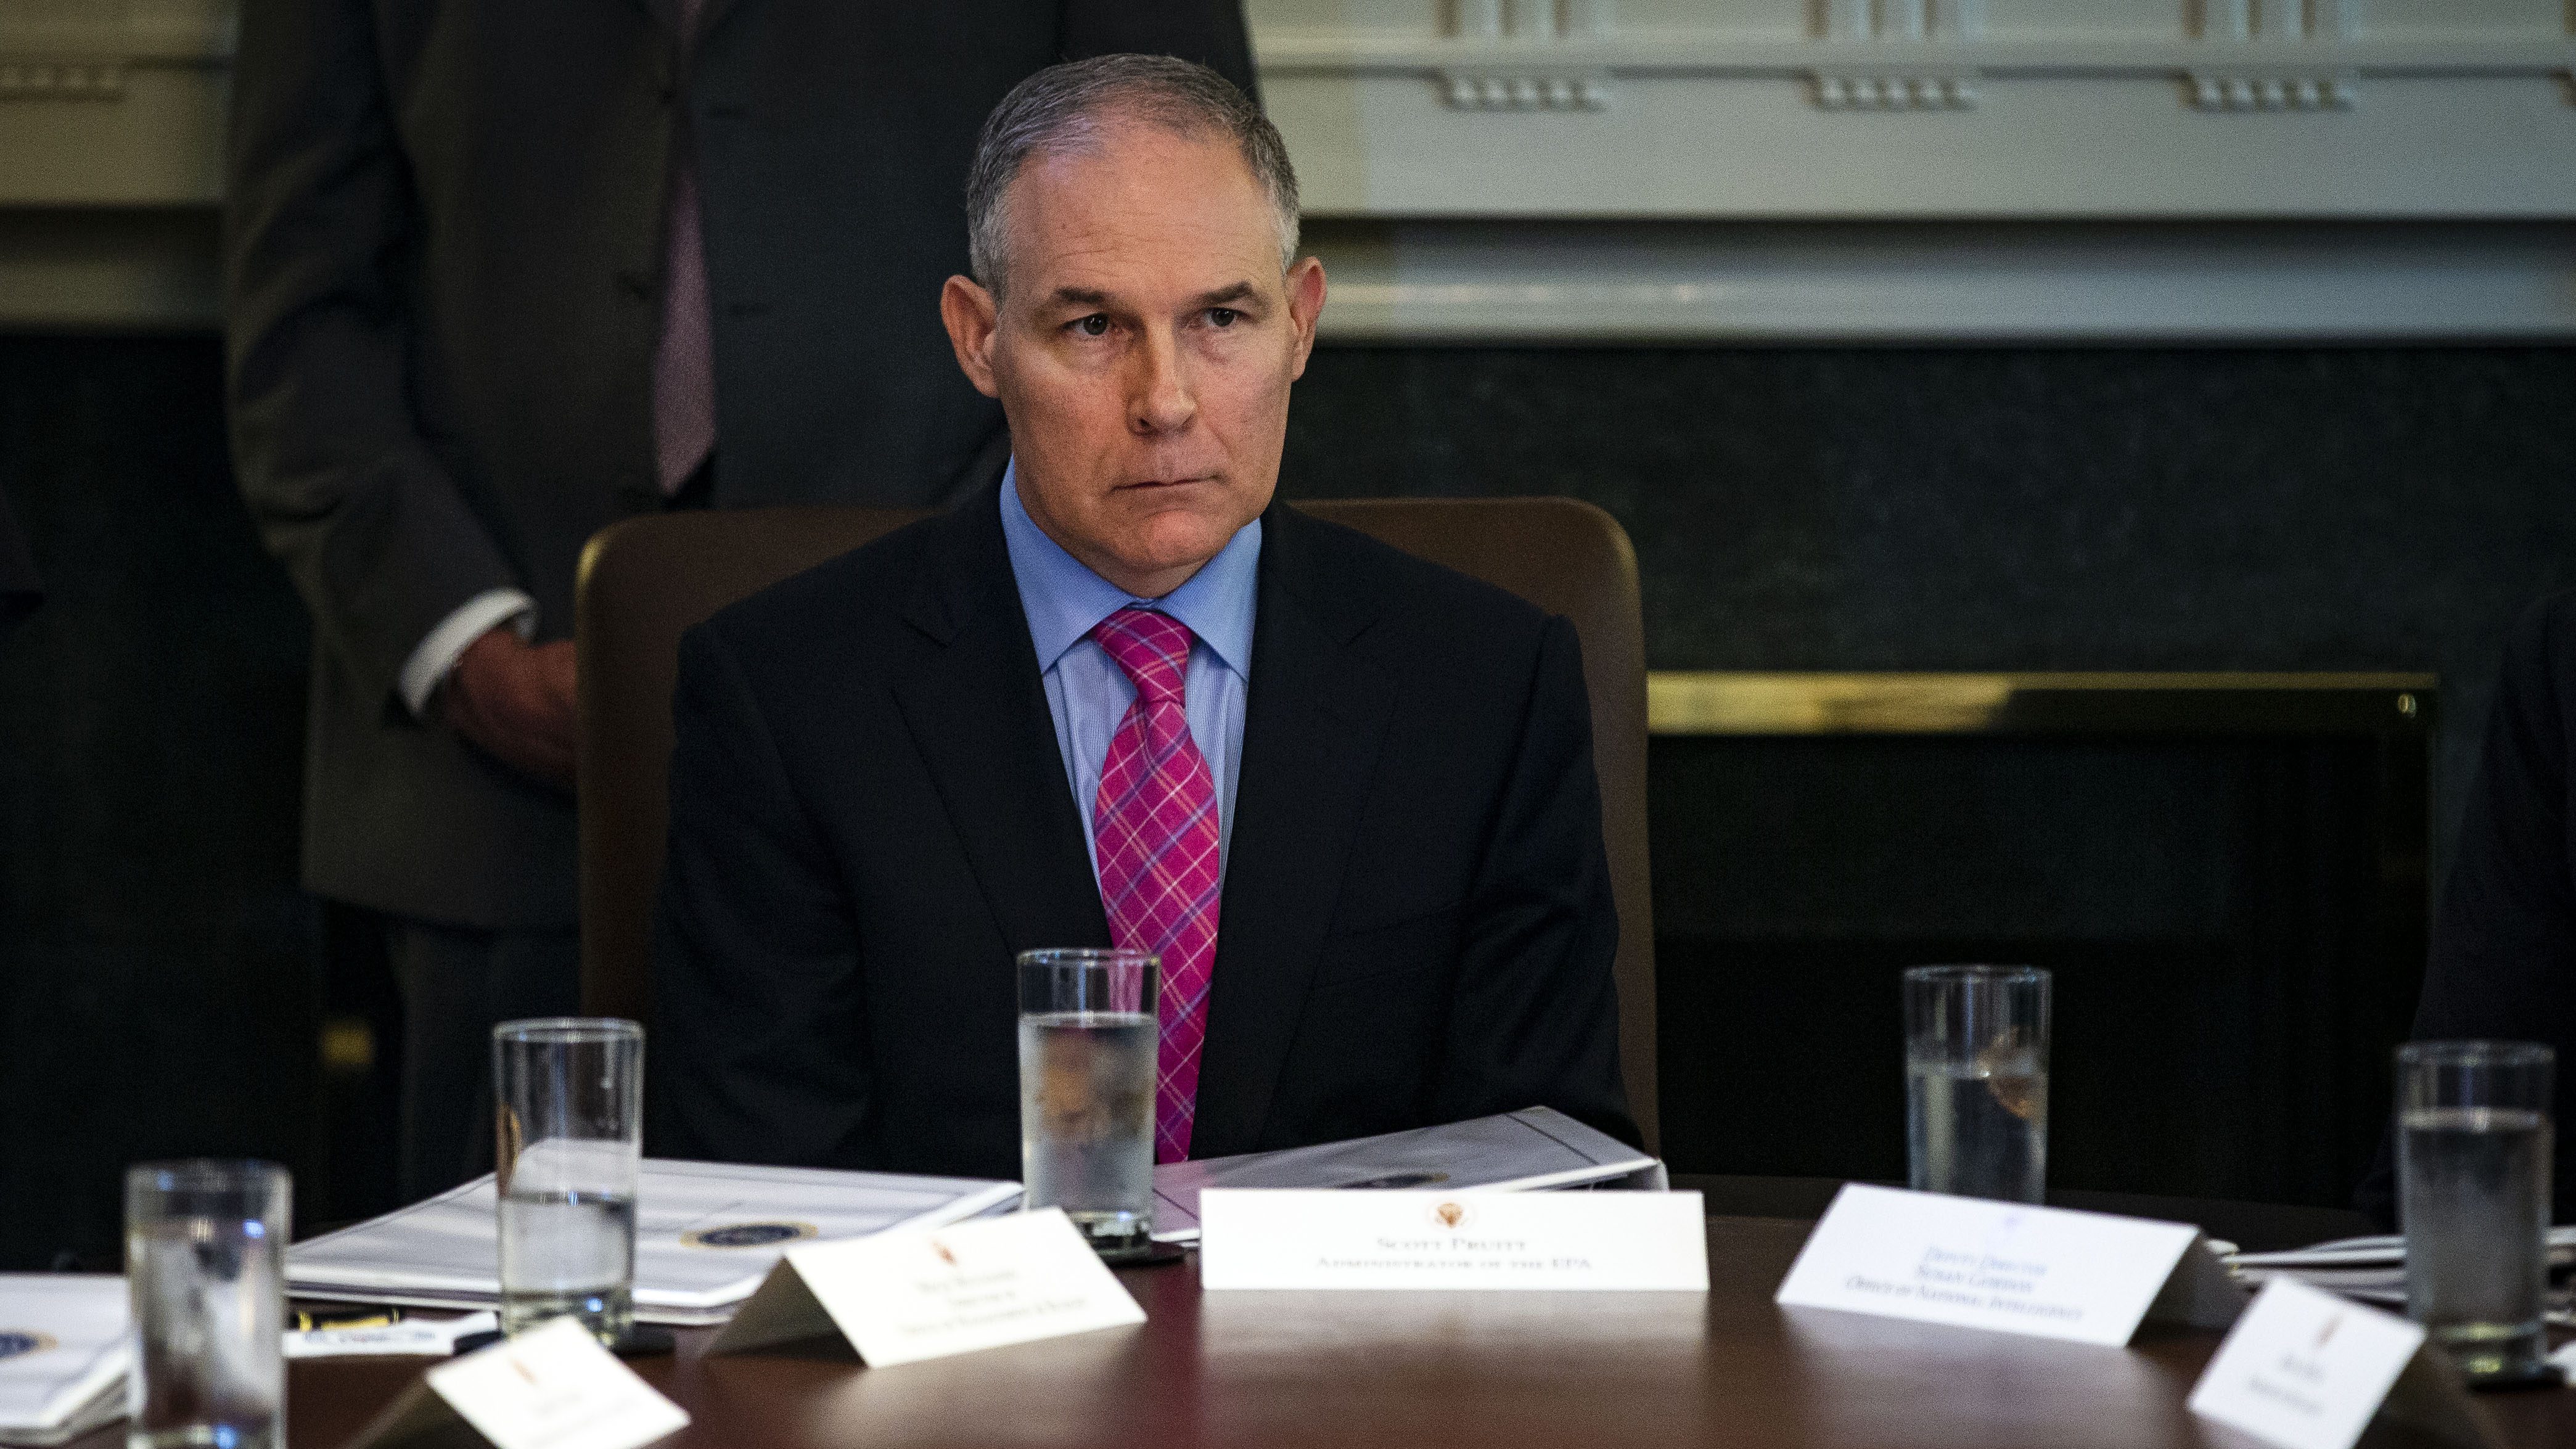 Former Administrator of the Environmental Protection Agency Scott Pruitt at a cabinet meeting in the White House.